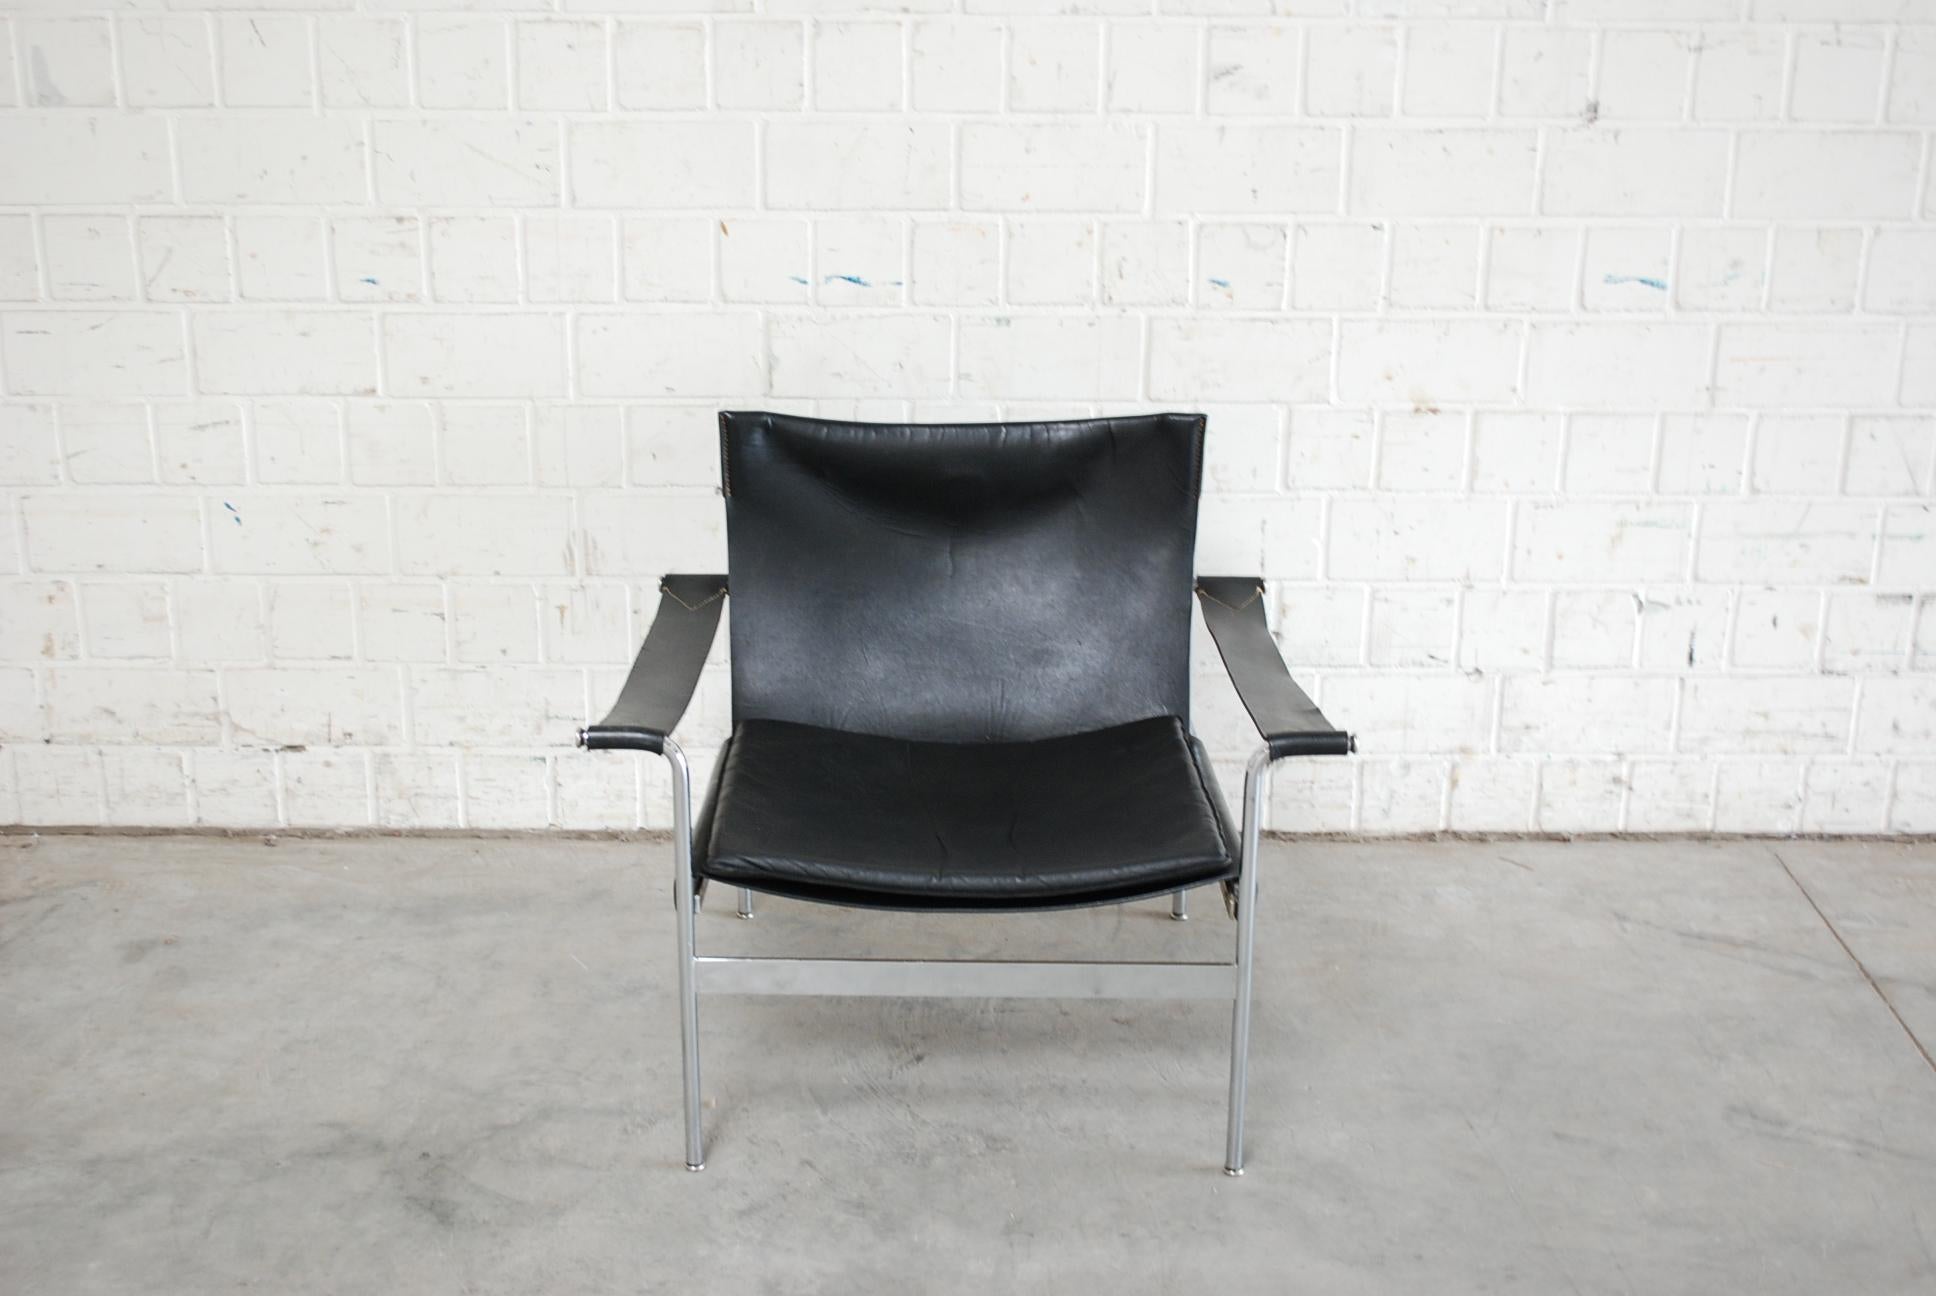 This armchair was manufactured by Tecta in the 1960s.
Design is from Hans Könecke.
It features a tubular steel and flat steel frame and an aniline leather and hide upholstery.
The seat cushion is loose and can be removed.